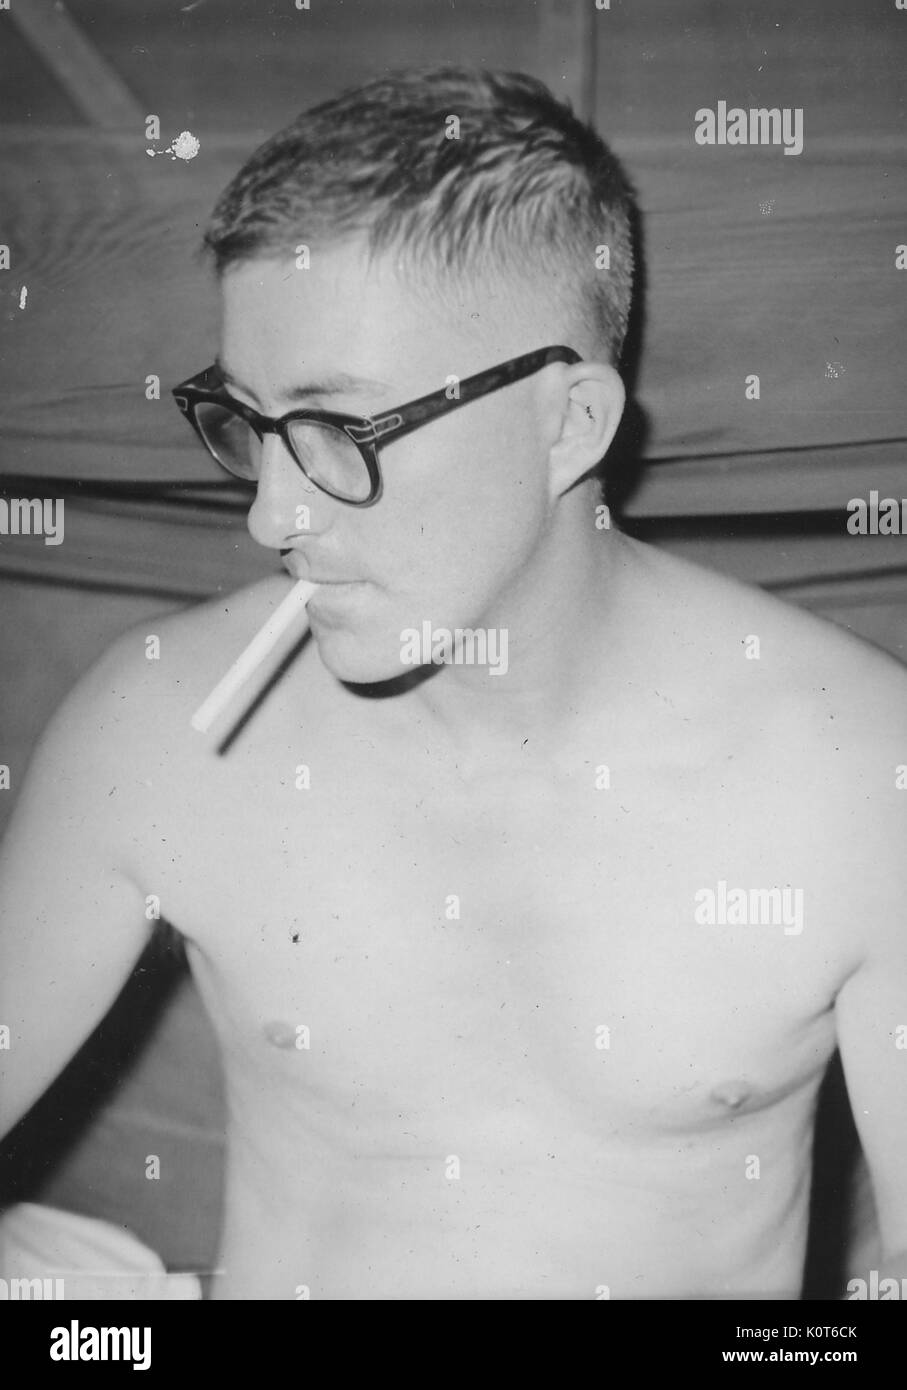 Soldier smoking a cigarette without his shirt on, wearing military issue glasses, Vietnam, 1967. Stock Photo